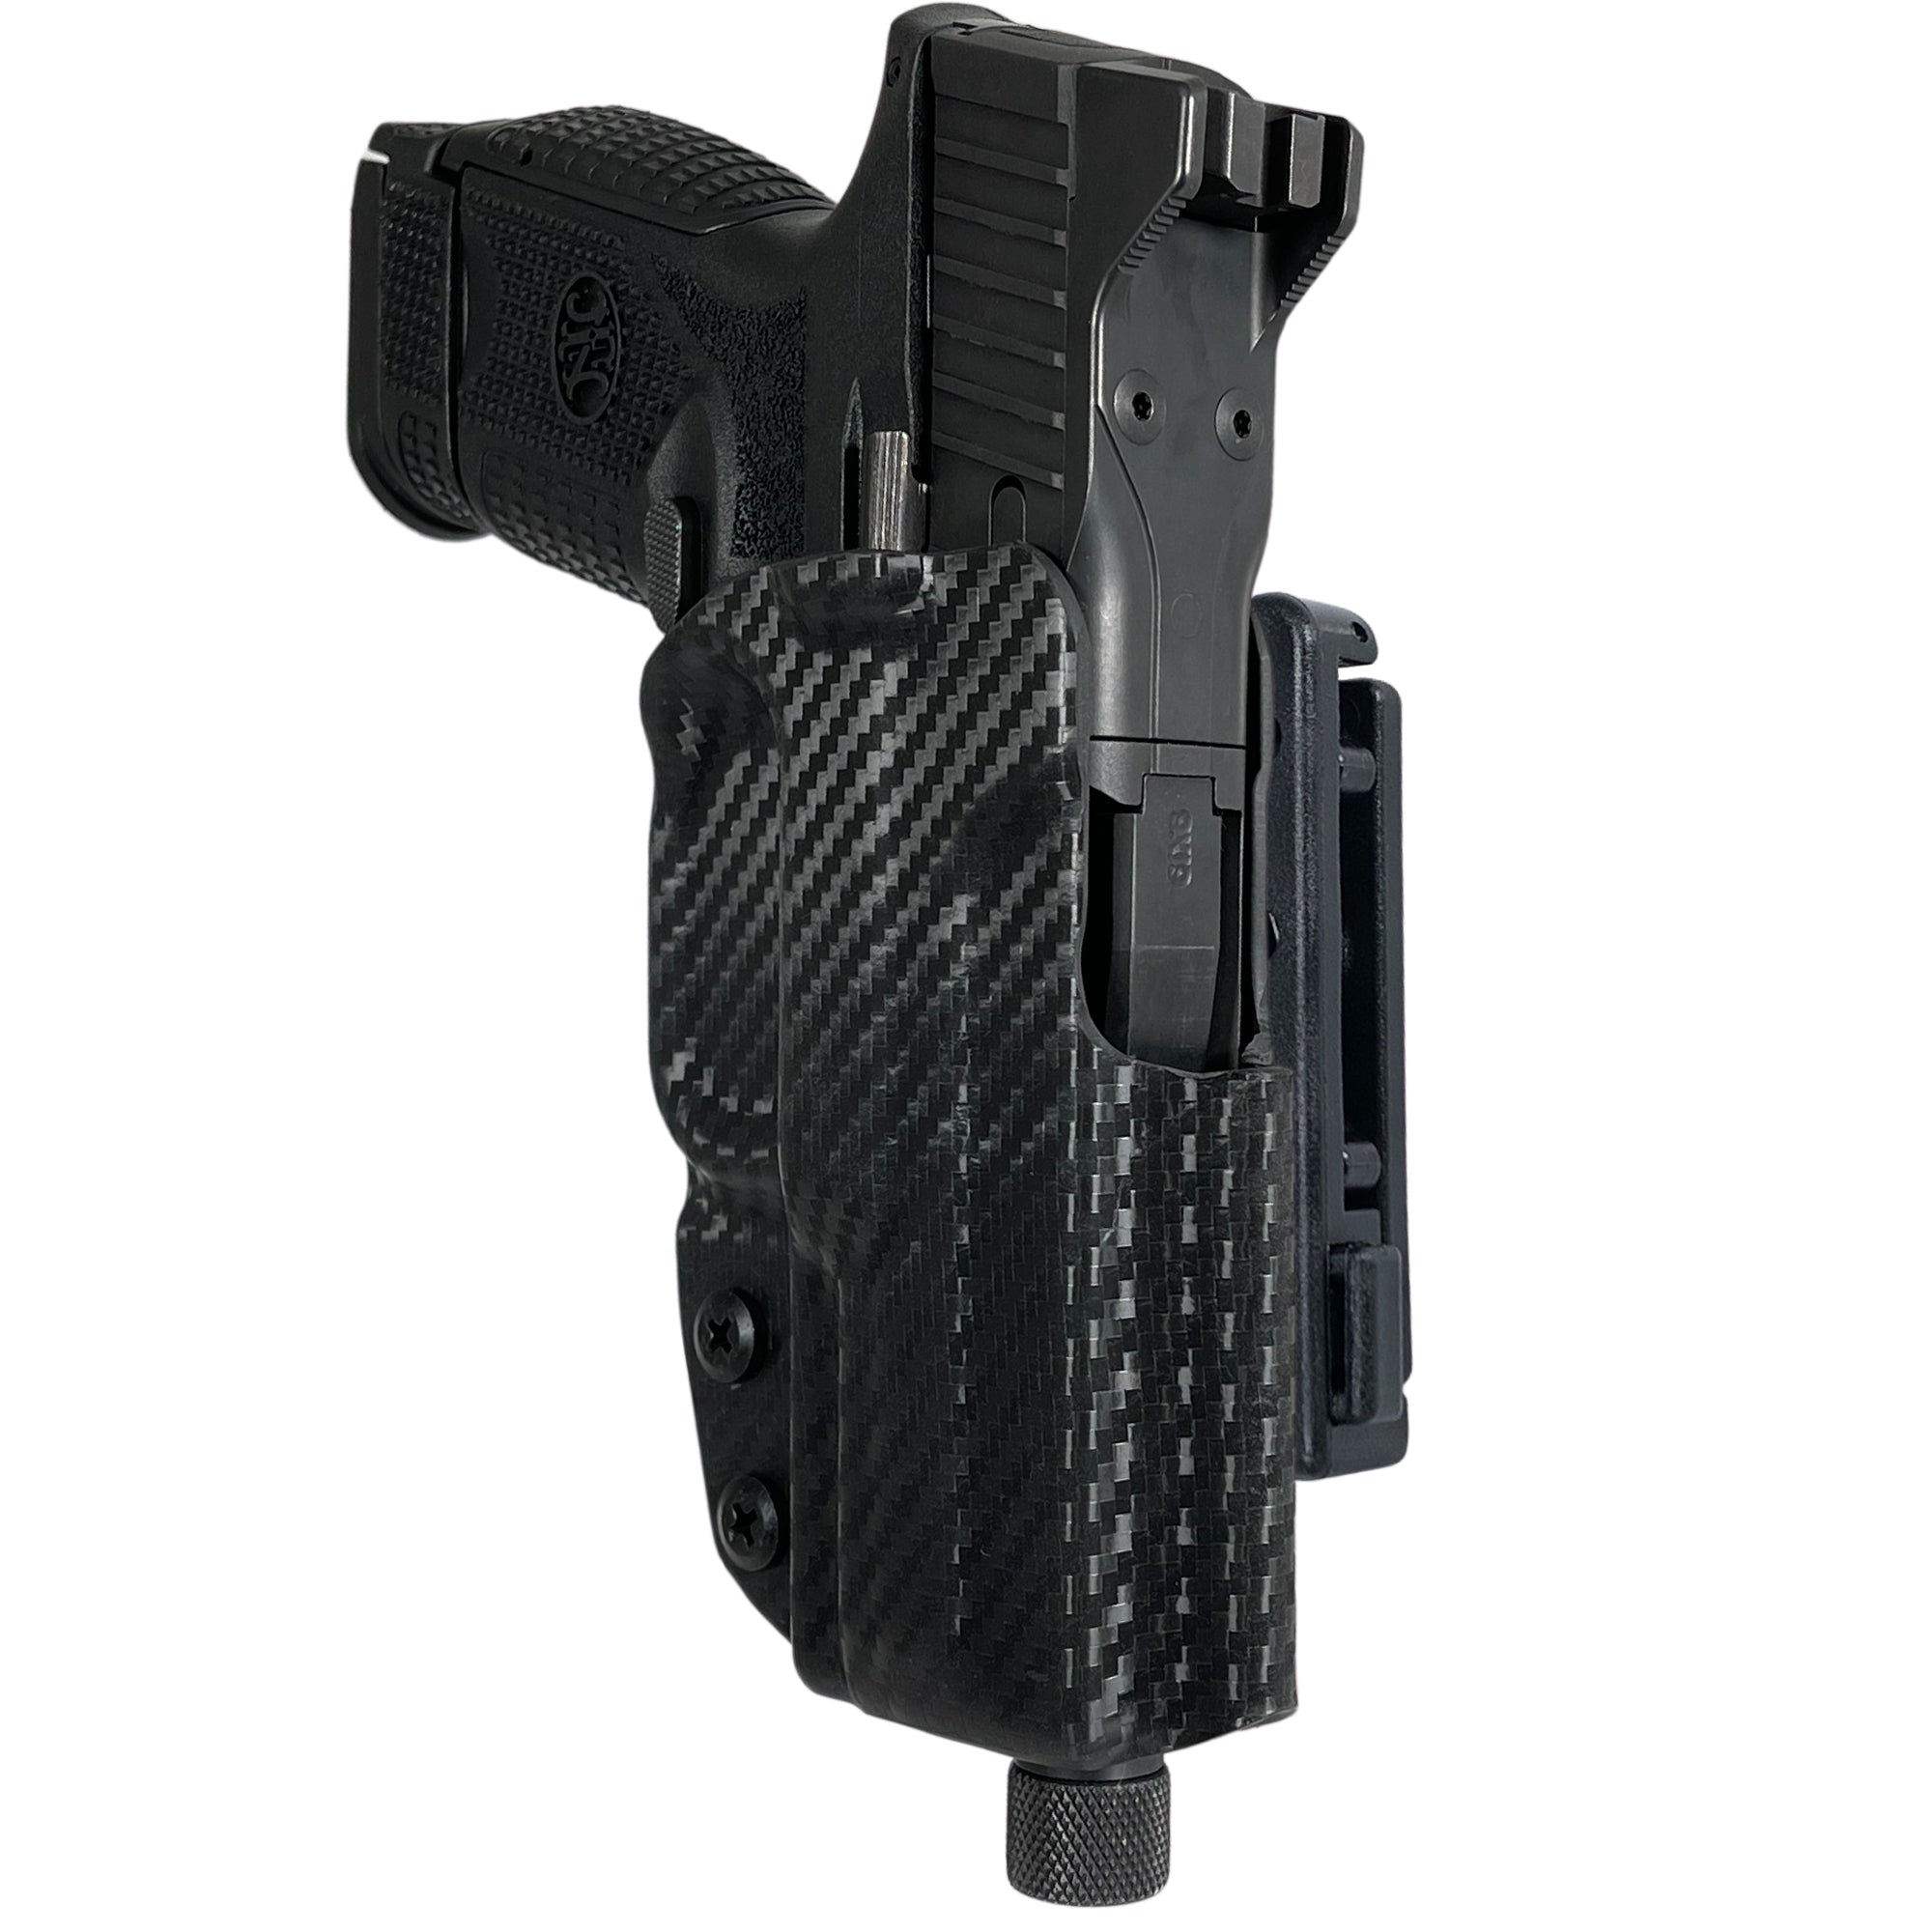 FNH 509 Compact/Midsize Pro IDPA Competition Holster